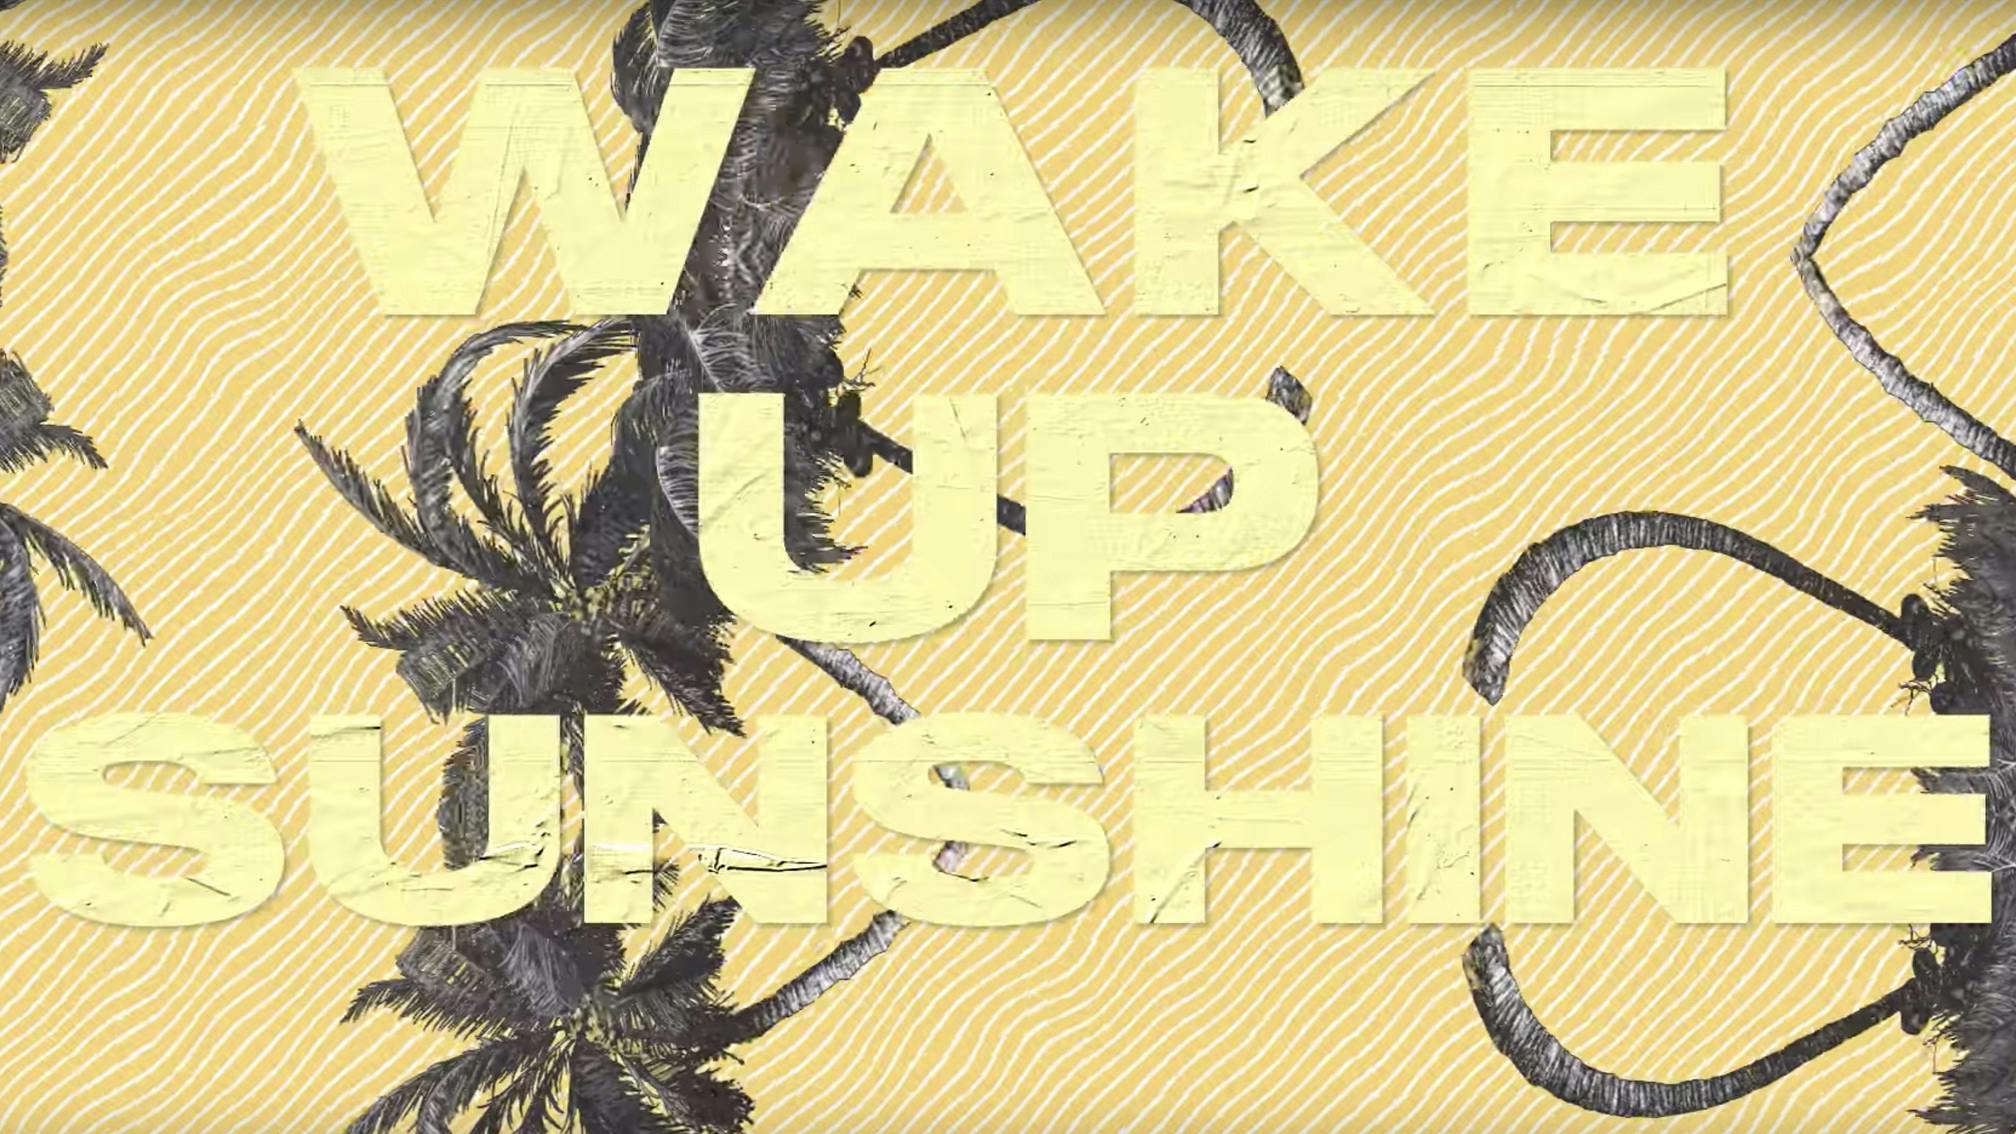 Listen To The Title-Track Of All Time Low's New Album, Wake Up, Sunshine